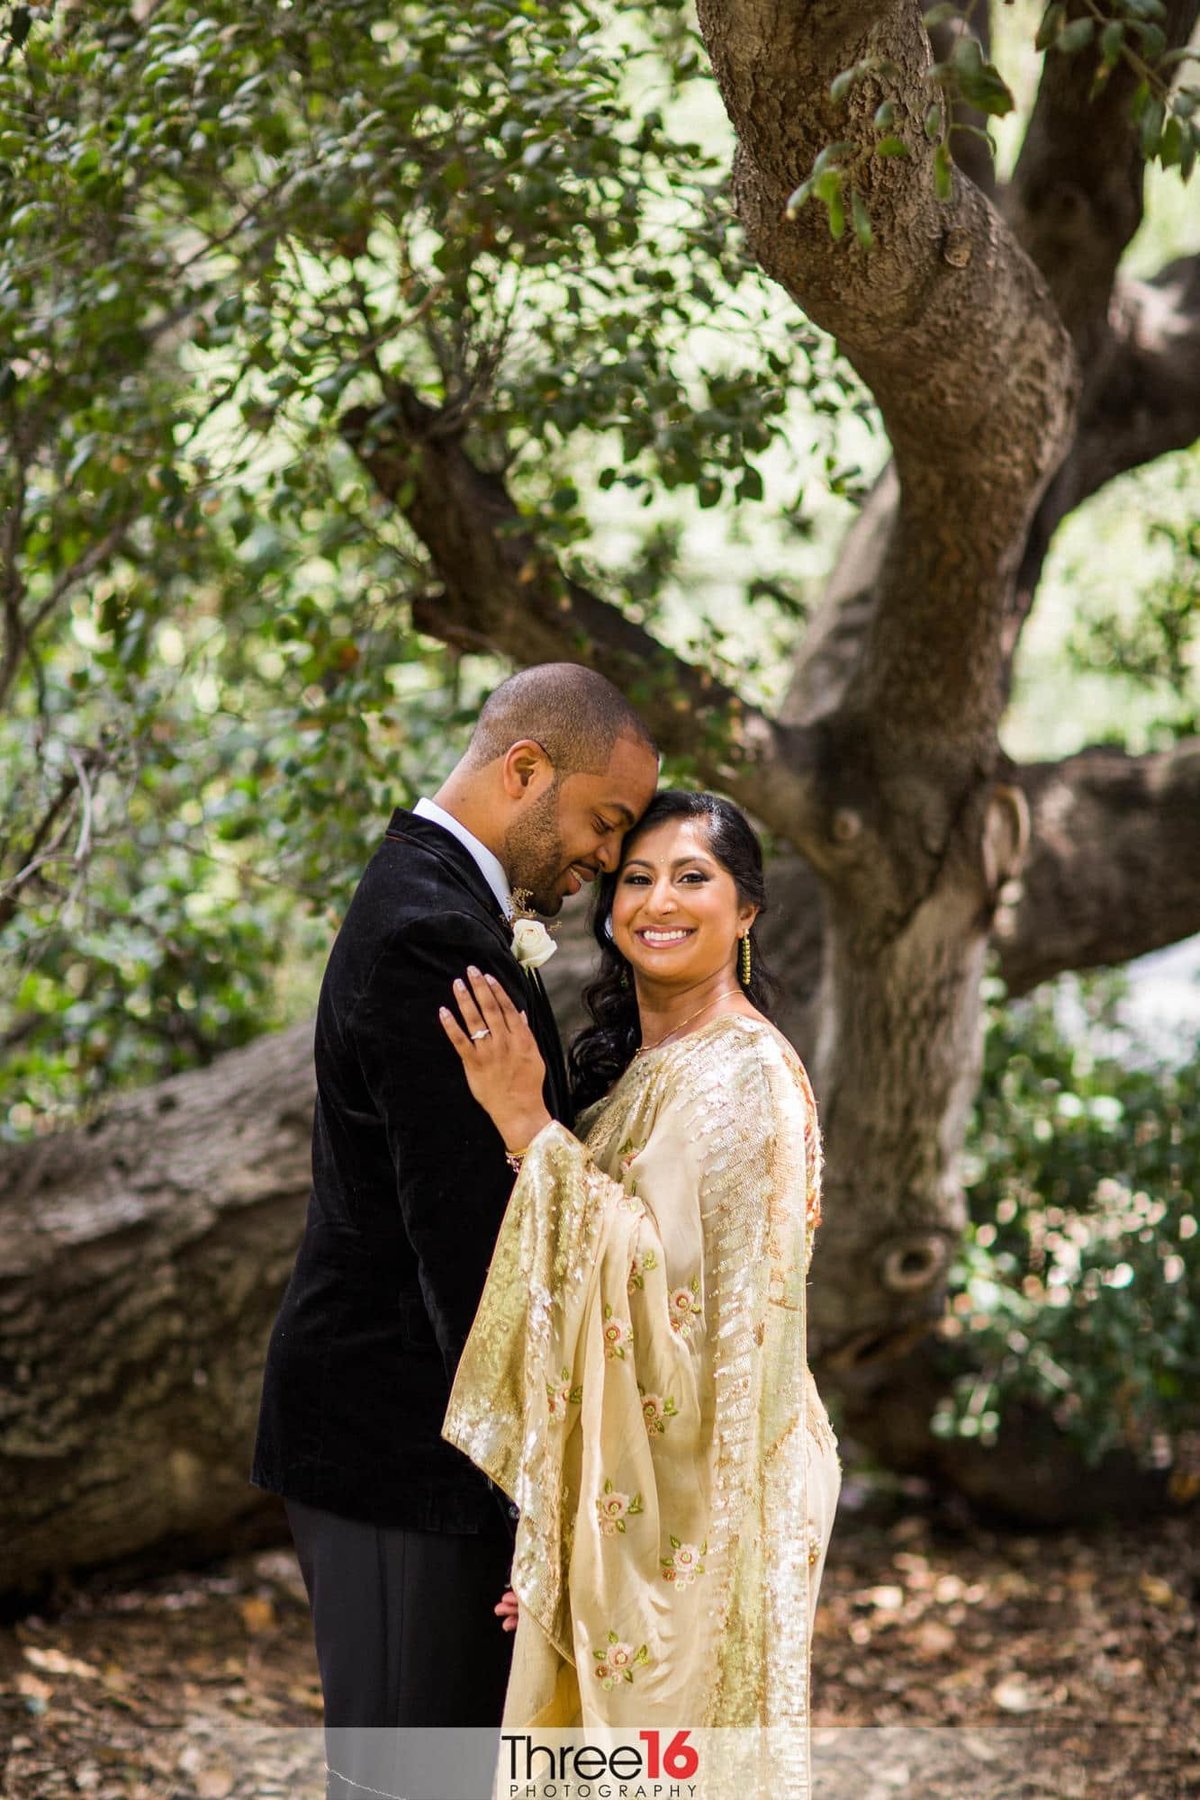 Sweet moment between Bride and Groom during photo session outside in garden area